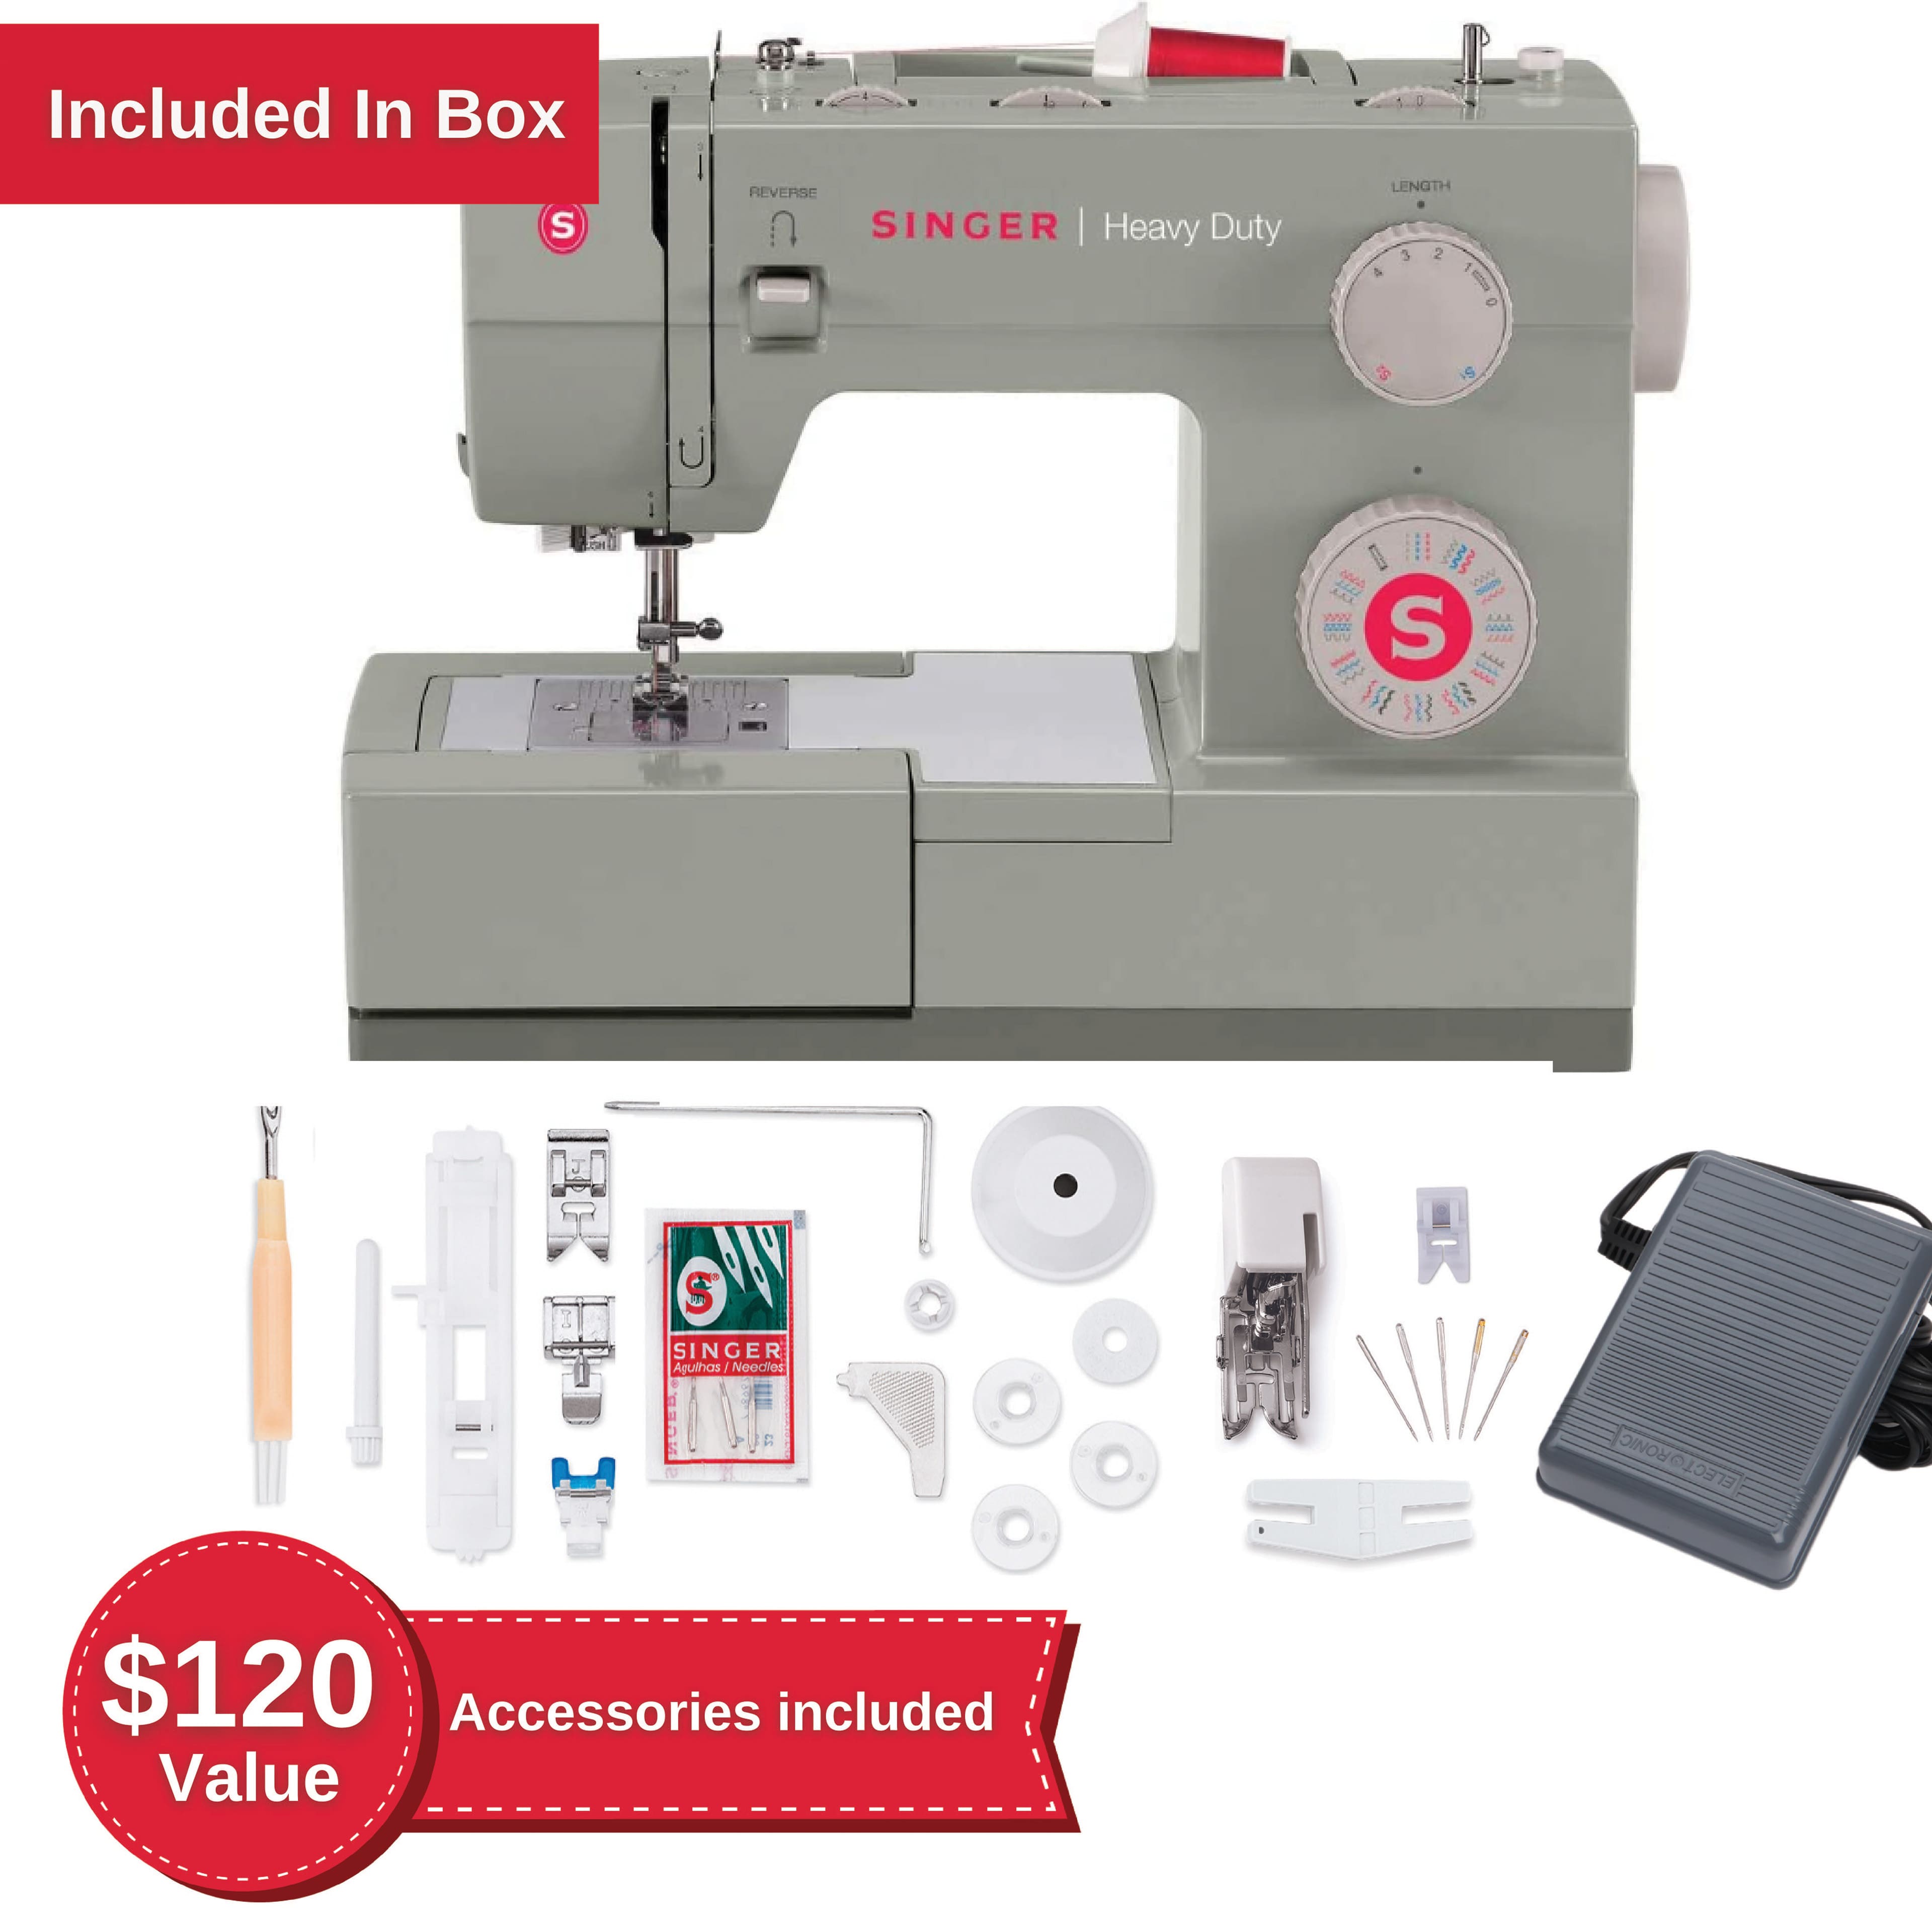 Michaels] Singer 4452 heavy duty sewing machine. $195 after promo code.  Regular price $279. Others on sale. - RedFlagDeals.com Forums